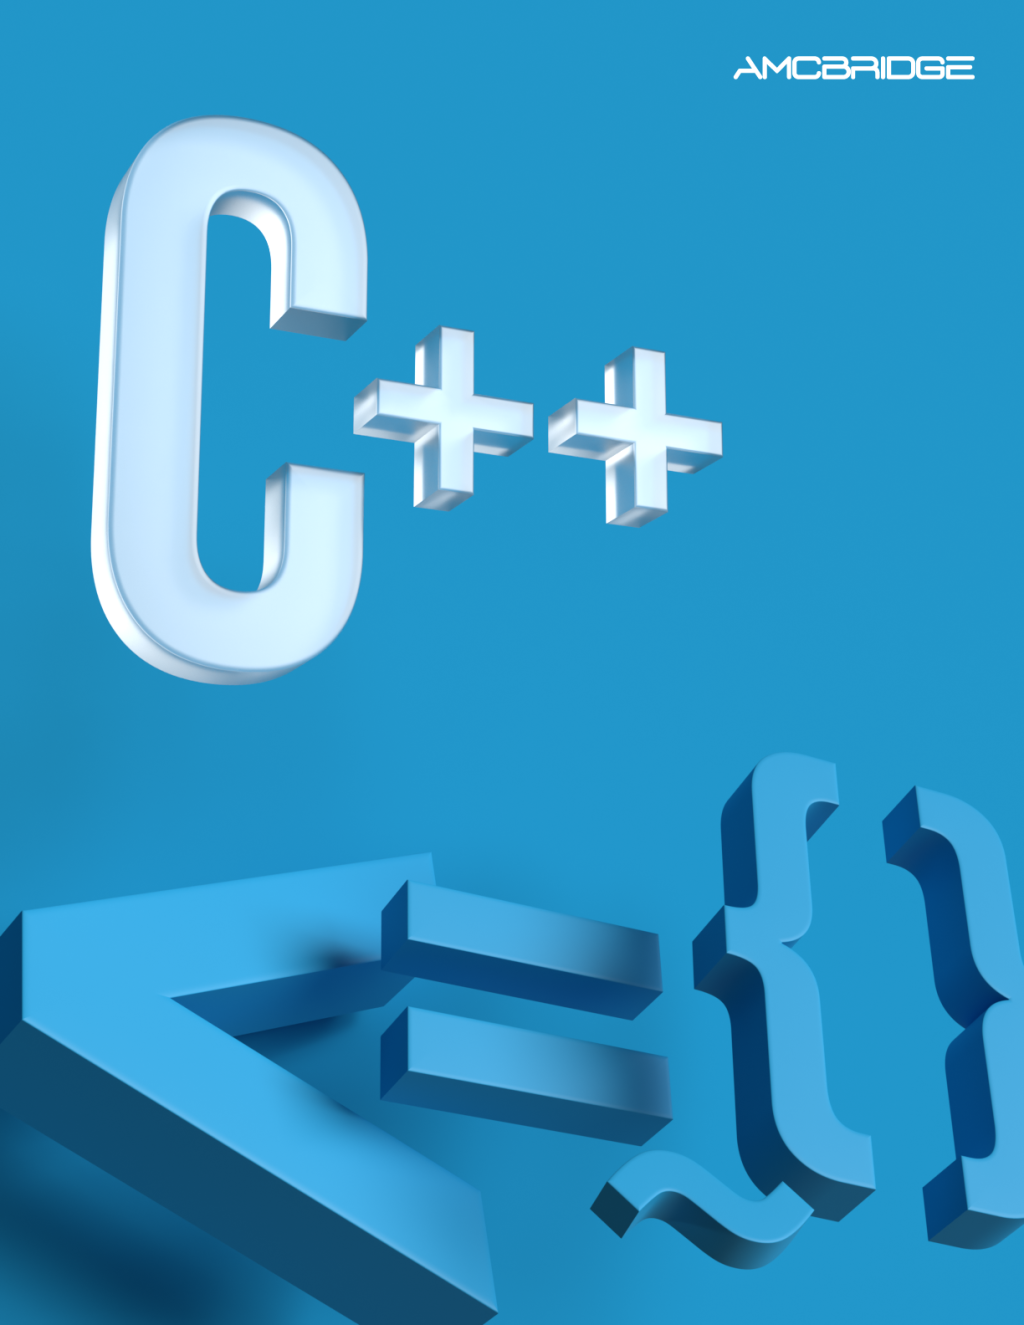 A Developer’s Guide to C++17, C++20, and C++23 Updates: What You Need to Know